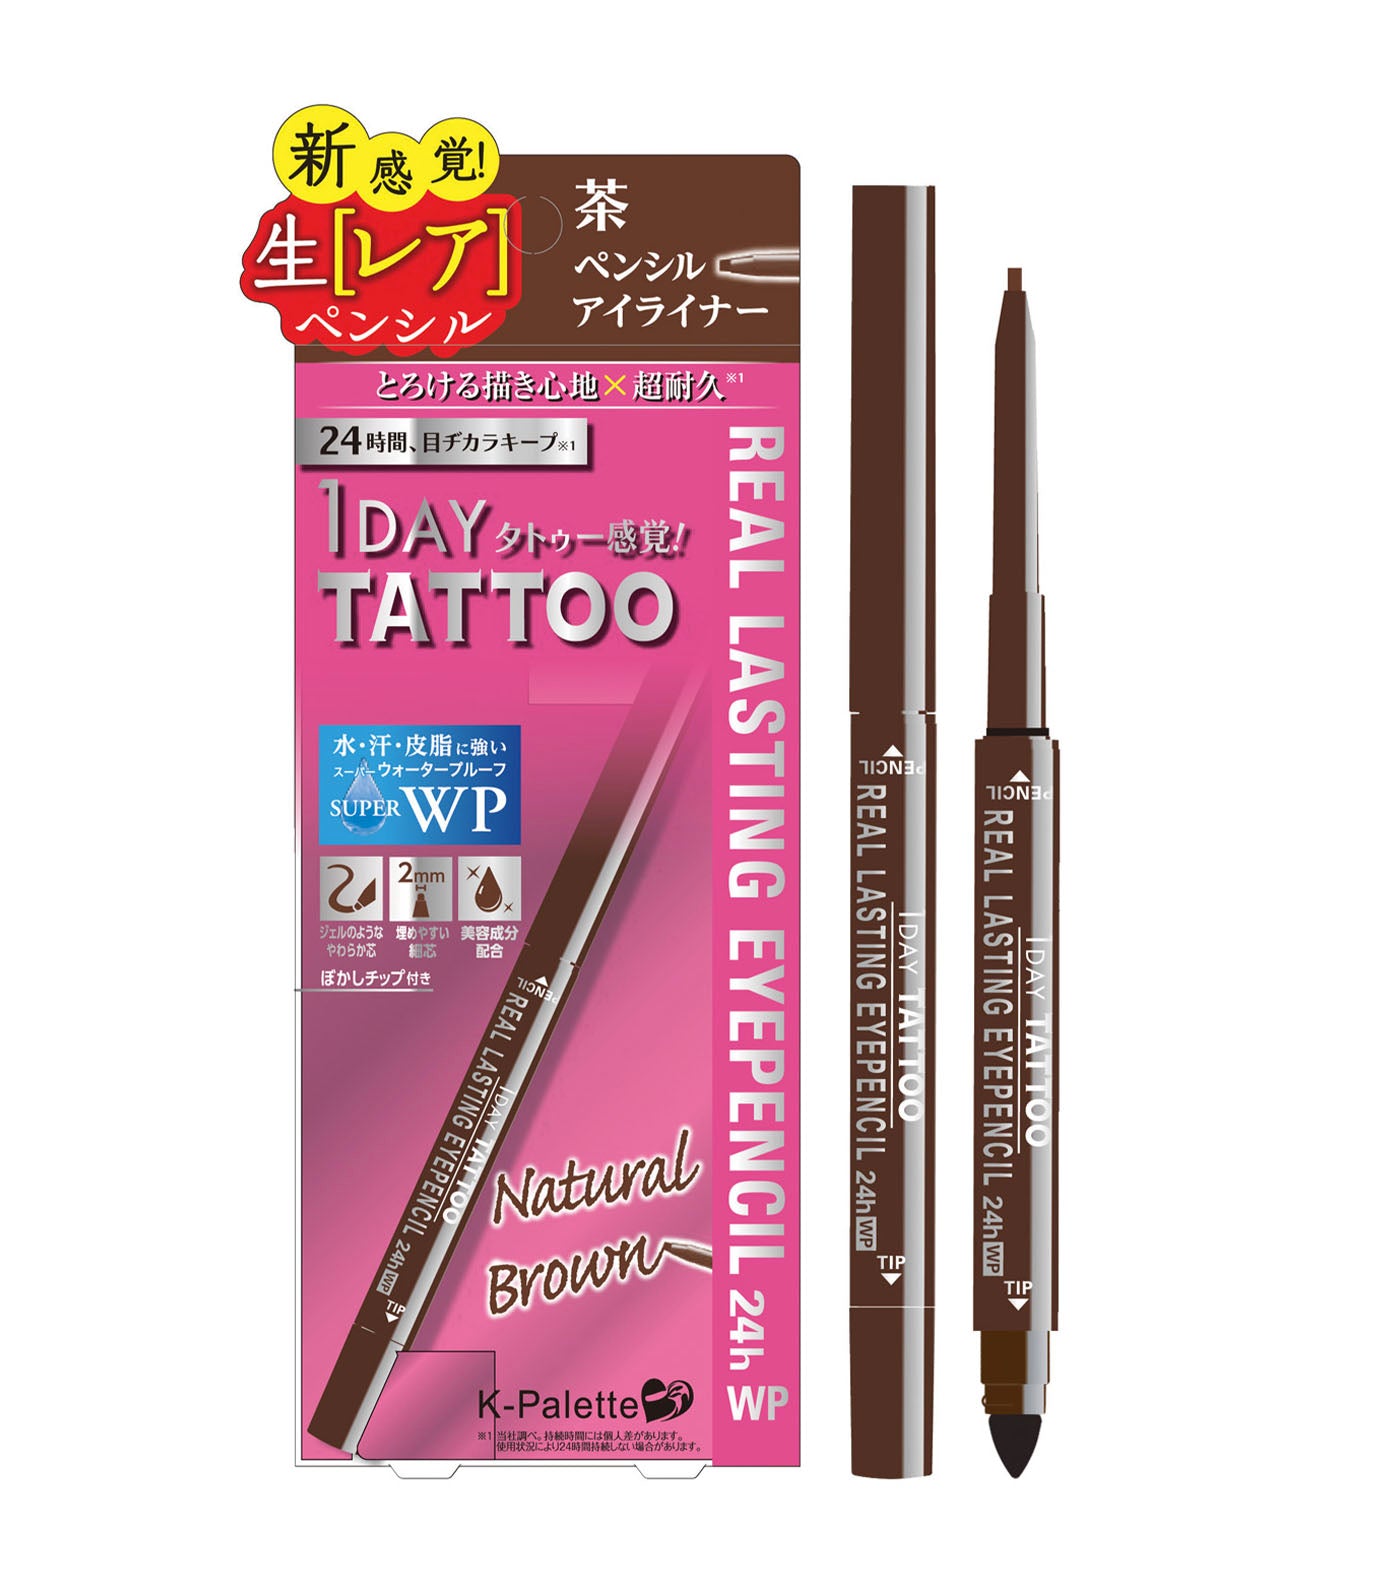 k-palette natural brown 1 day tattoo real lasting eyepencil